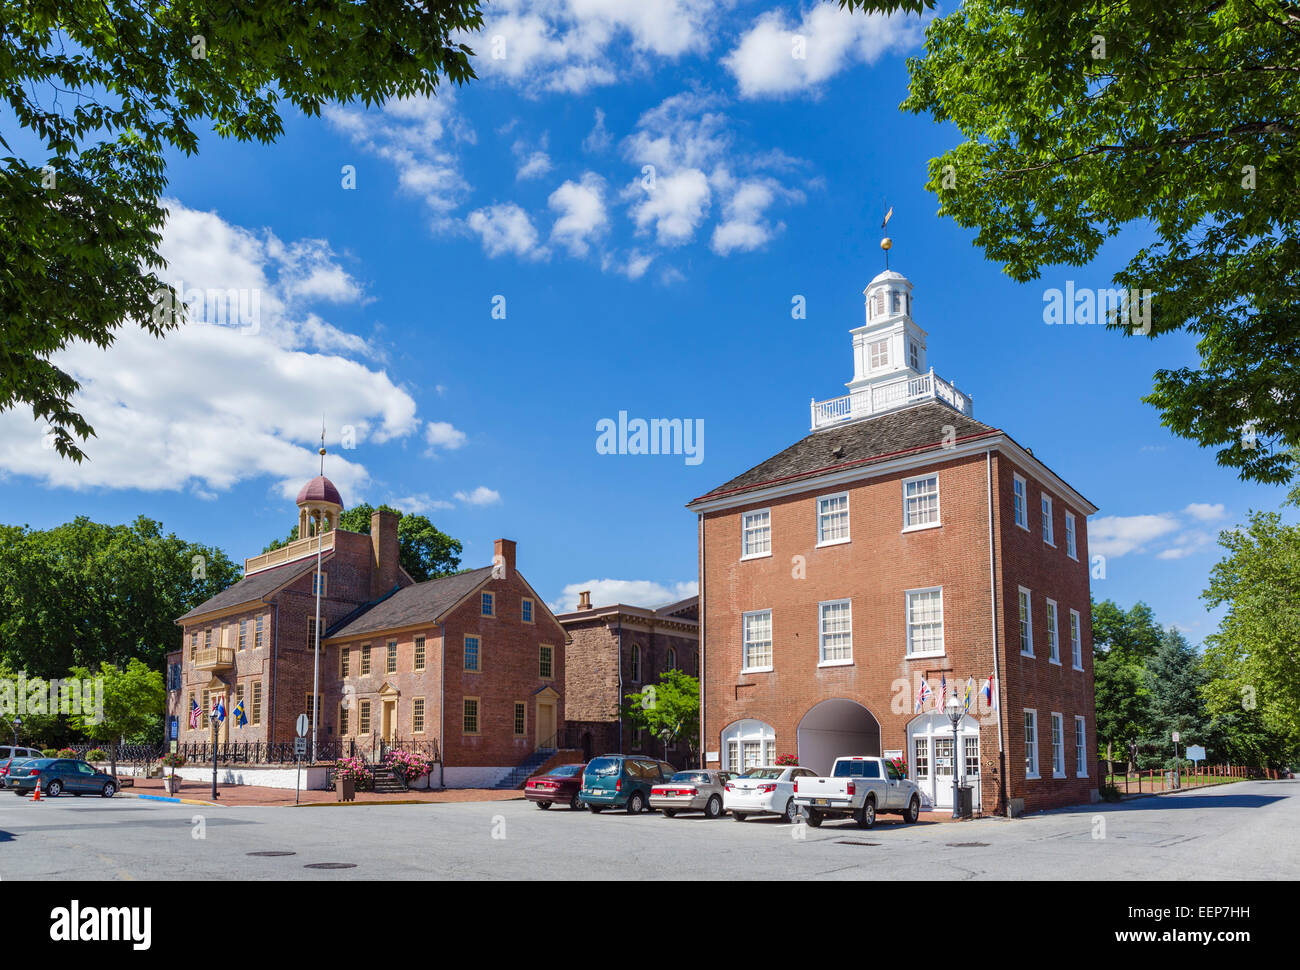 Delaware Street in the historic district showing the Old New Castle Court House, New Castle, Delaware, USA Stock Photo